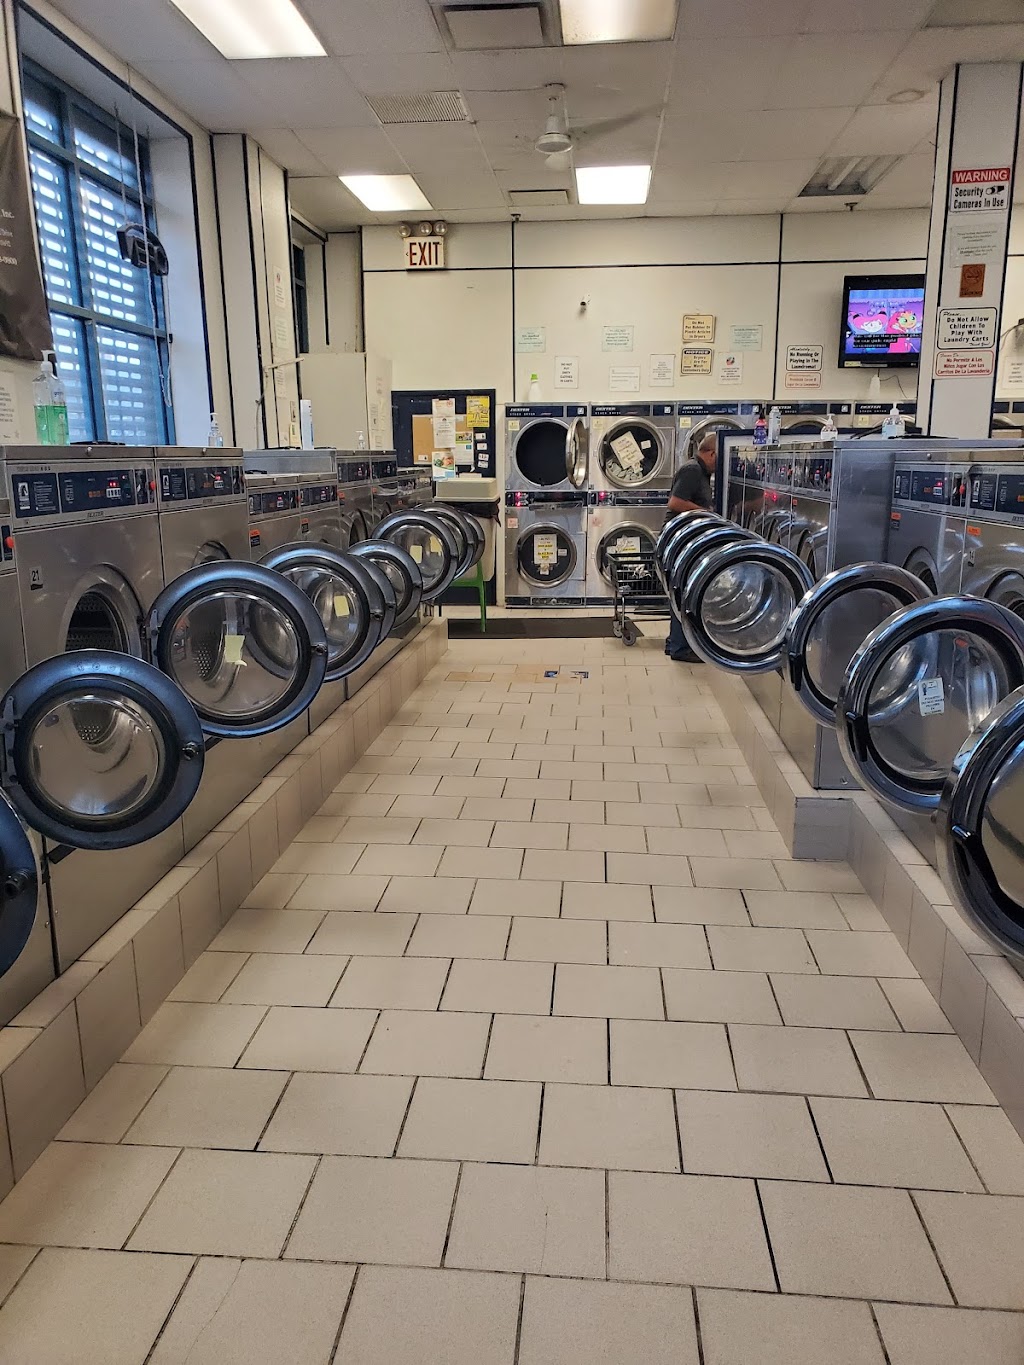 M&E Wash & Dry | 71-30 Beach Channel Dr, Queens, NY 11692 | Phone: (718) 474-0800